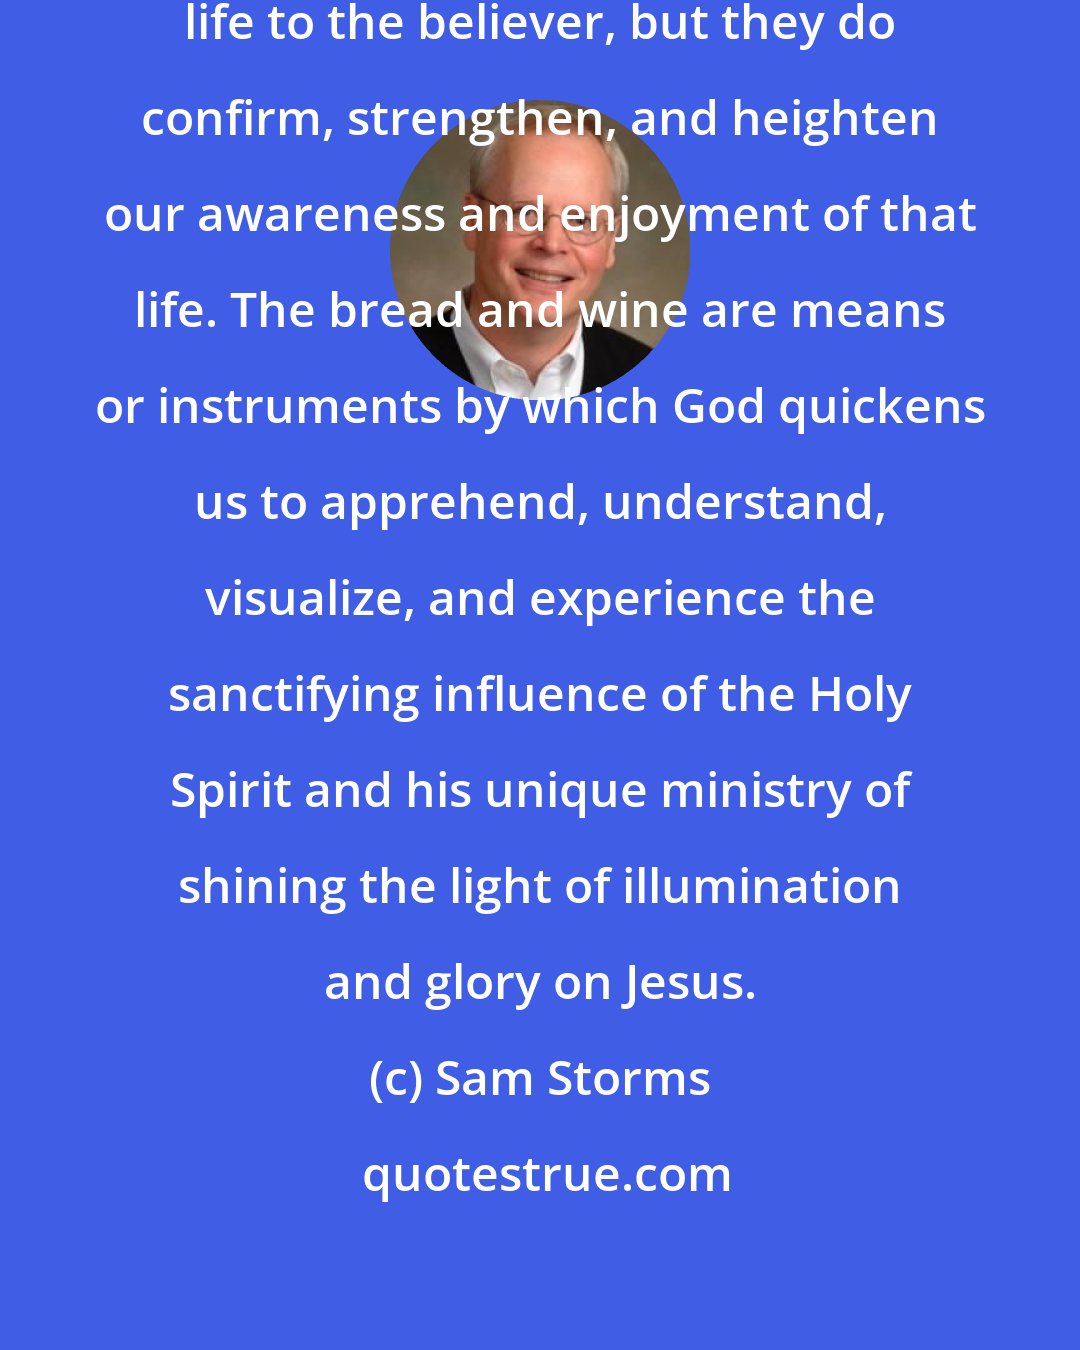 Sam Storms: The ordinances do not impart eternal life to the believer, but they do confirm, strengthen, and heighten our awareness and enjoyment of that life. The bread and wine are means or instruments by which God quickens us to apprehend, understand, visualize, and experience the sanctifying influence of the Holy Spirit and his unique ministry of shining the light of illumination and glory on Jesus.